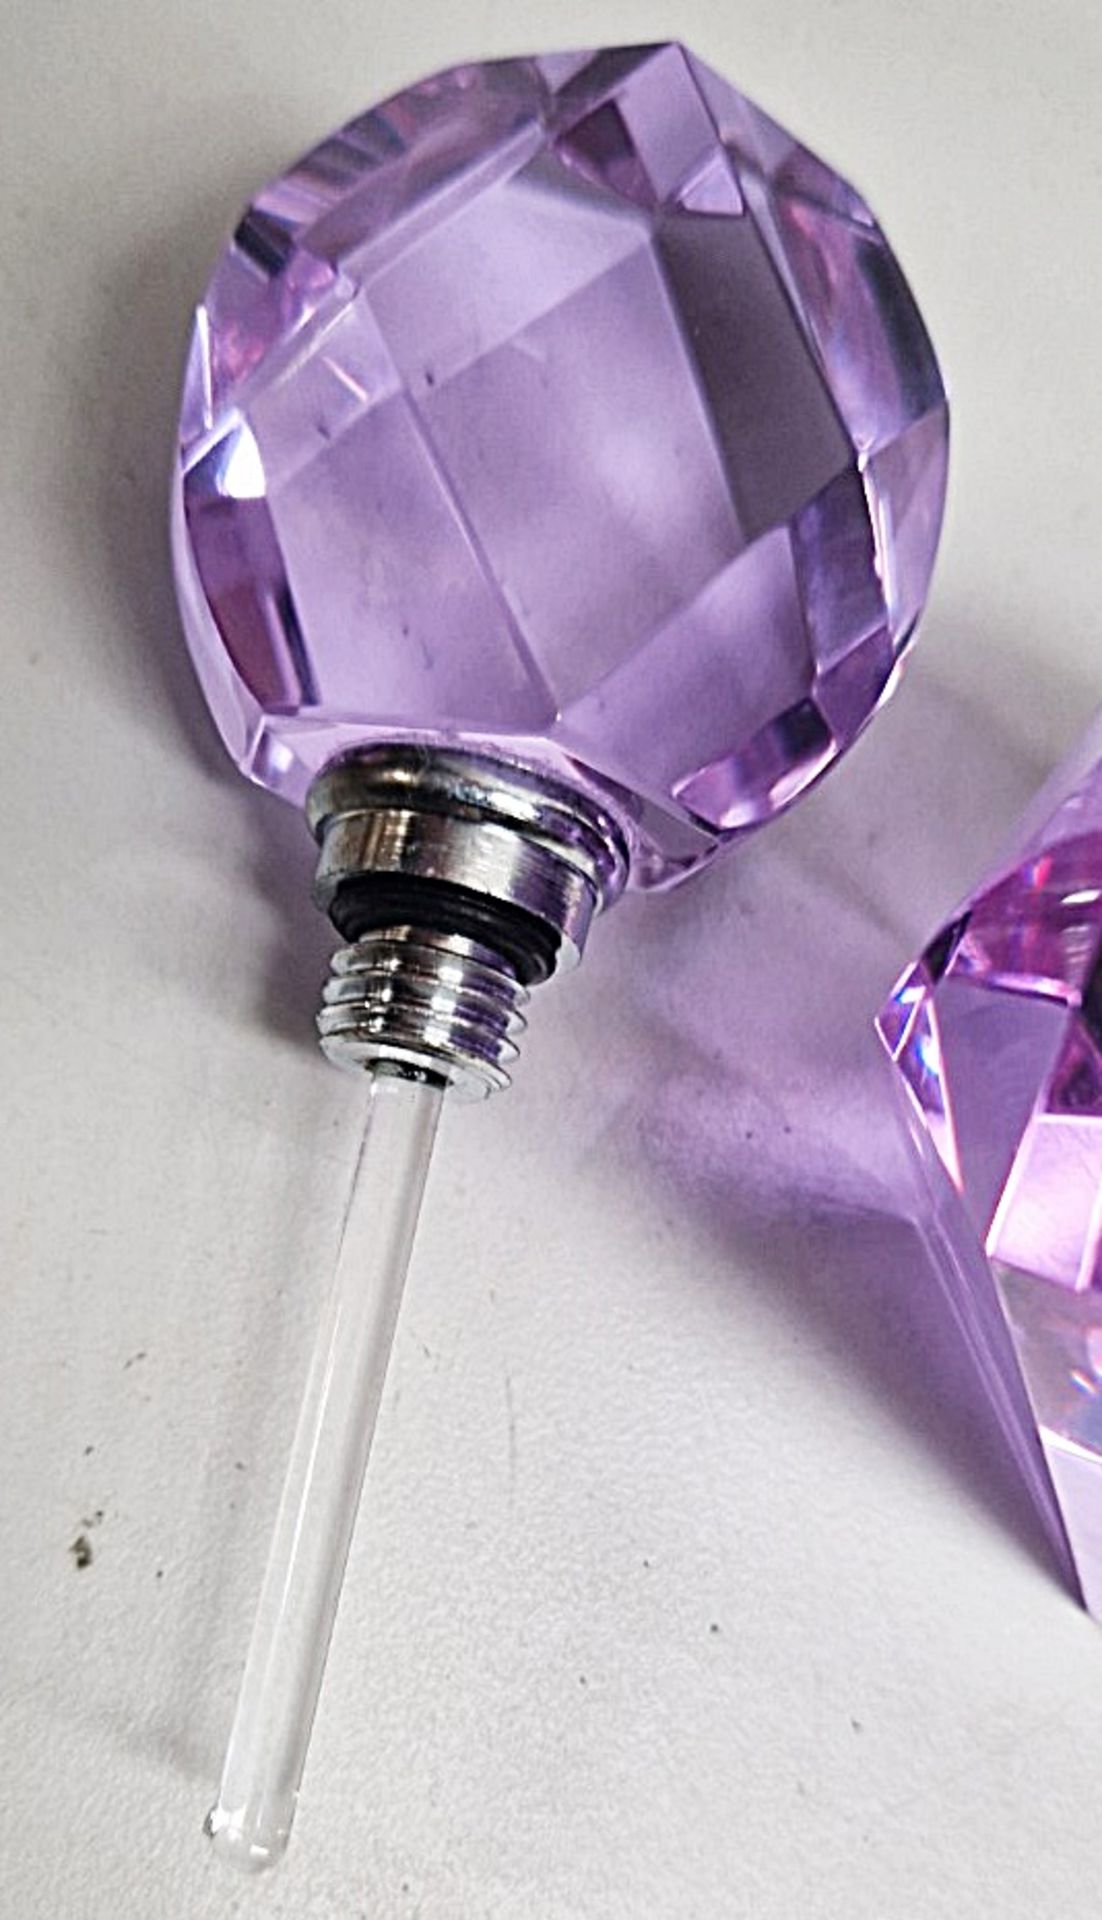 1 x Beautiful Purple Crystal Glass Perfume Bottle With Dauber And Threaded Stopper - Image 6 of 6